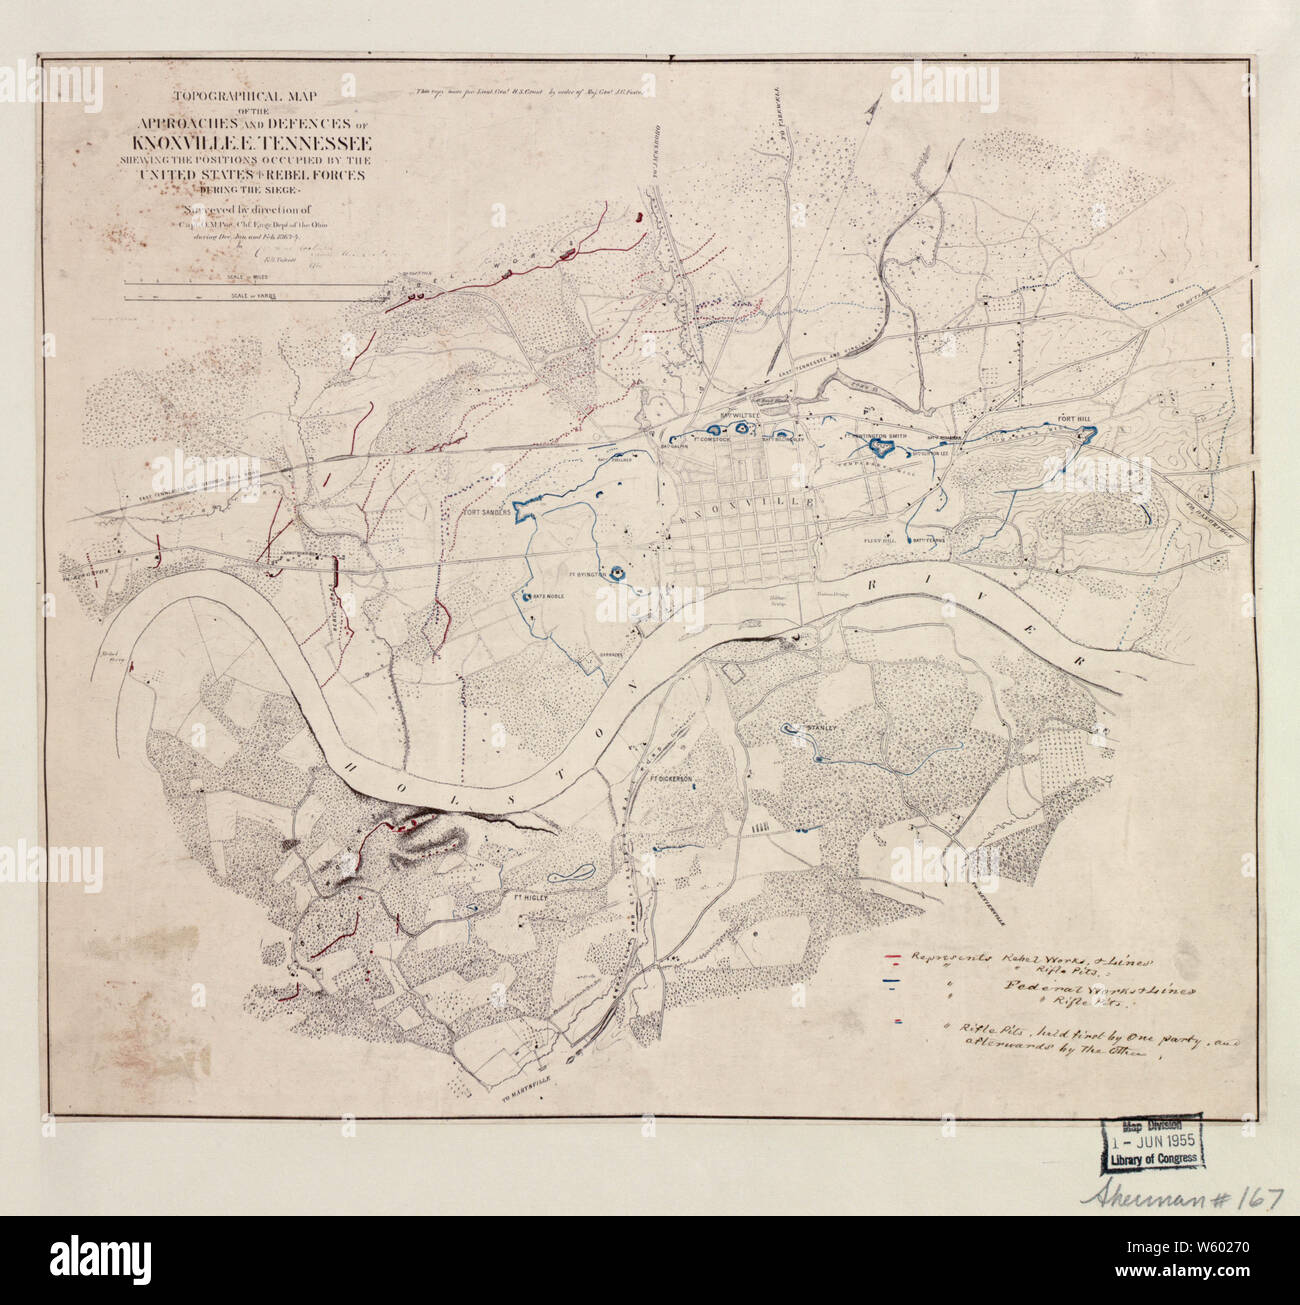 Civil War Maps 1838 Topographical map of the approaches and defences of Knoxville E Tennessee shewing the positions occupied by the United States Rebel forces during the siege 02 Rebuild and Repair Stock Photo